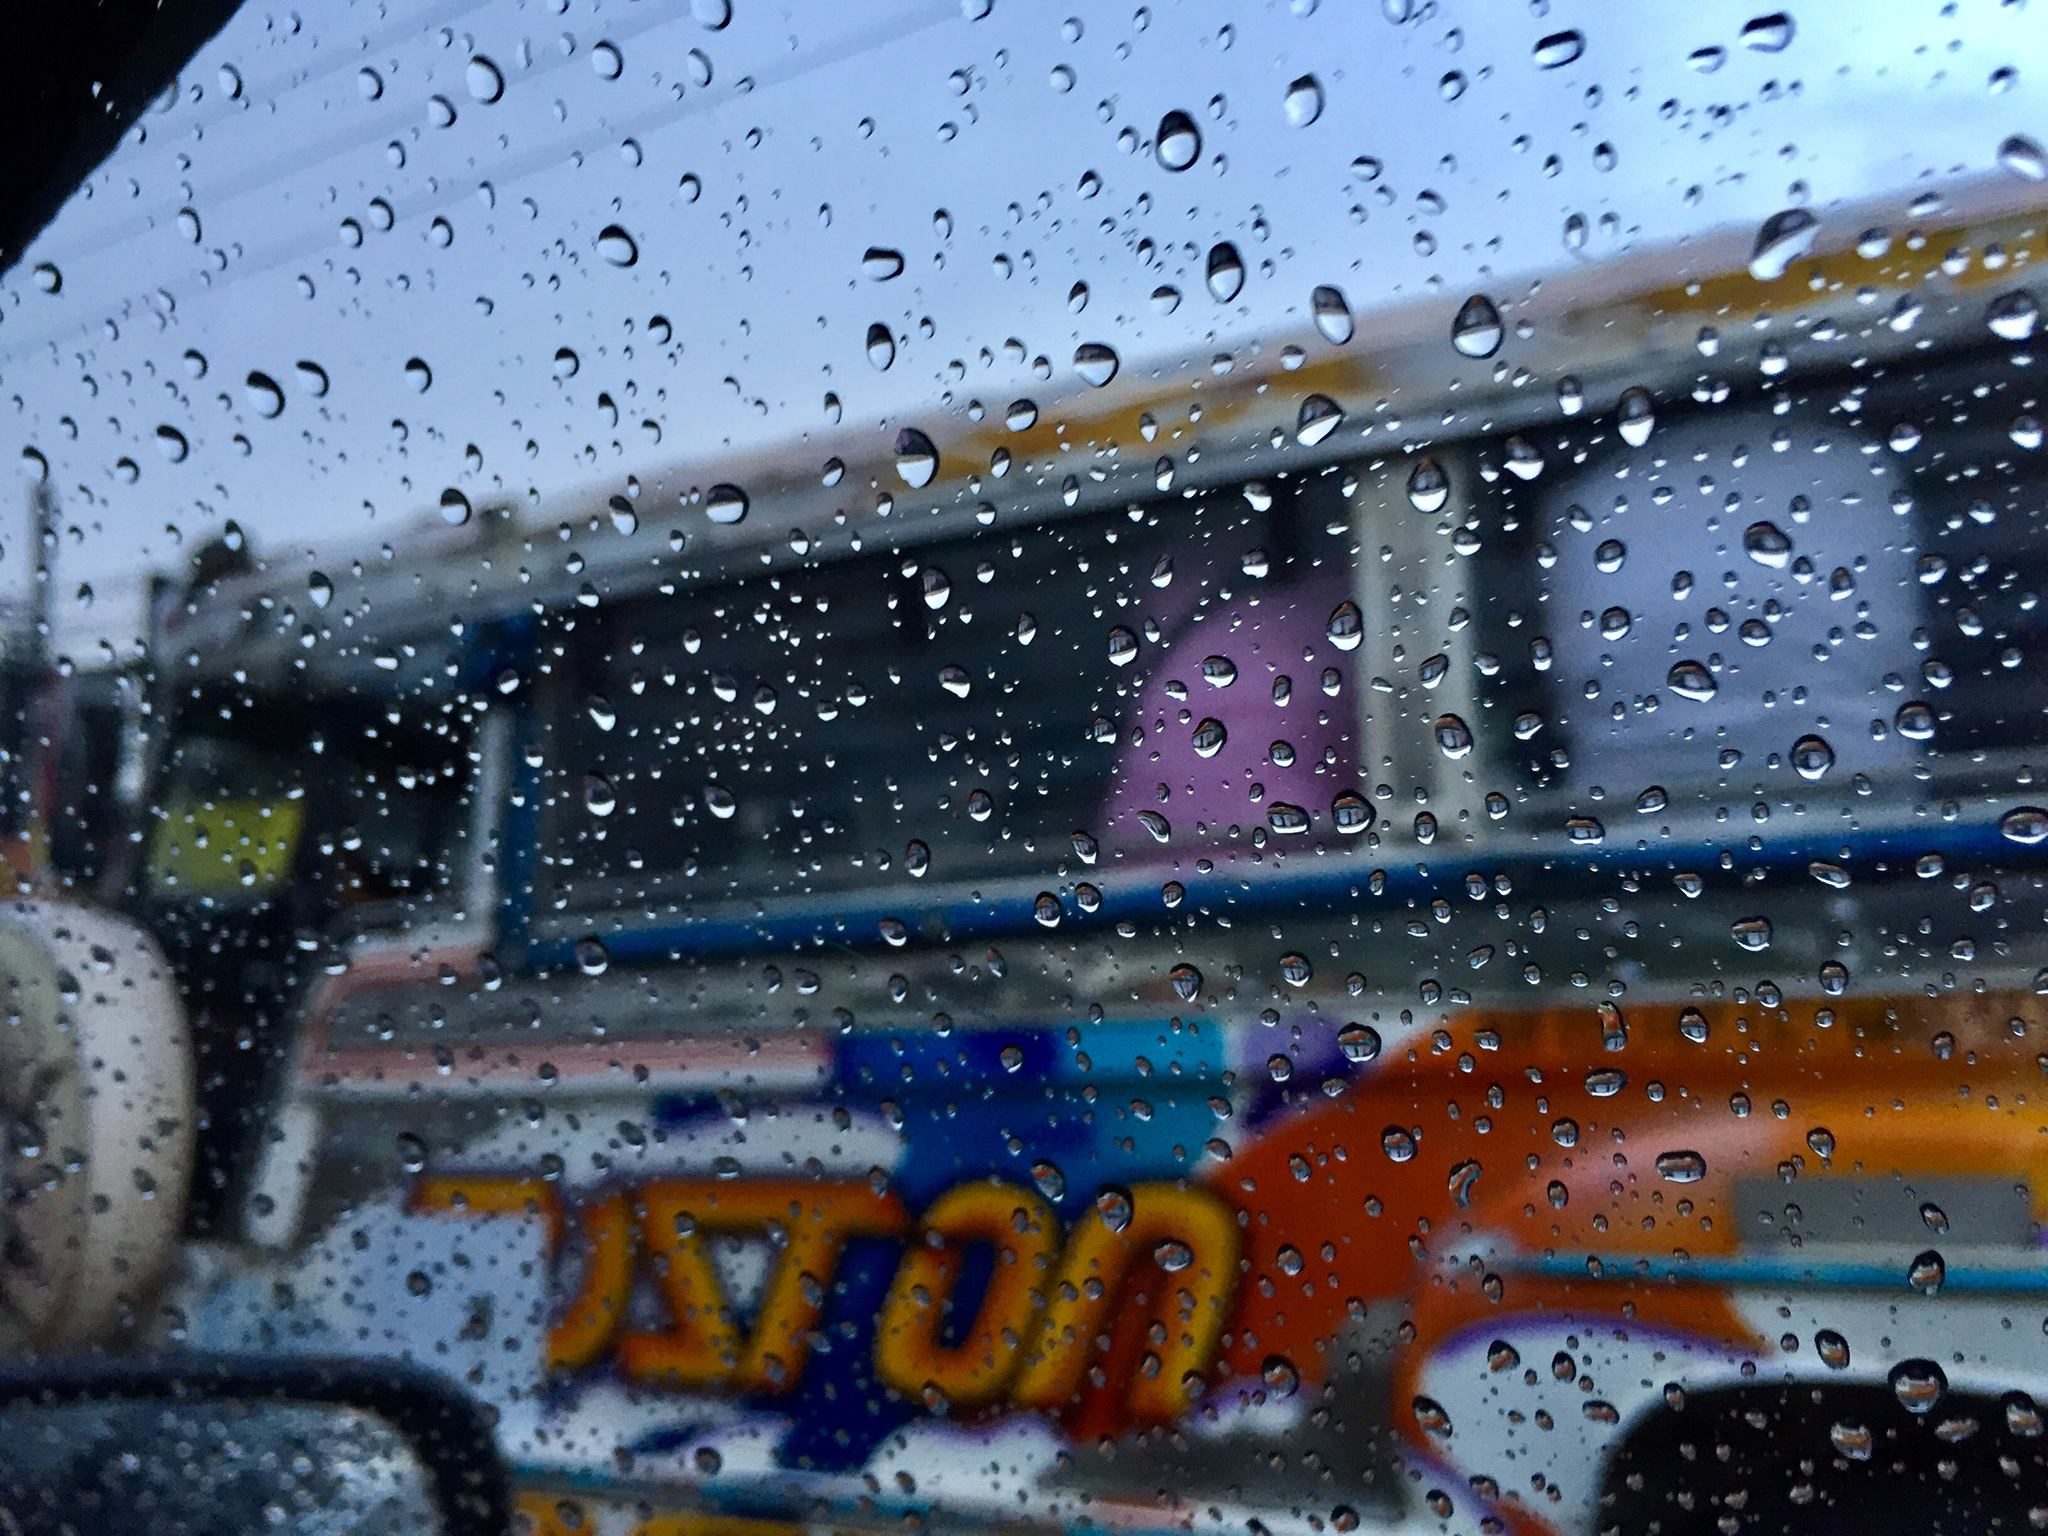 Afternoon rain showers provide respite for Cagayan de Oro amid sweltering heat